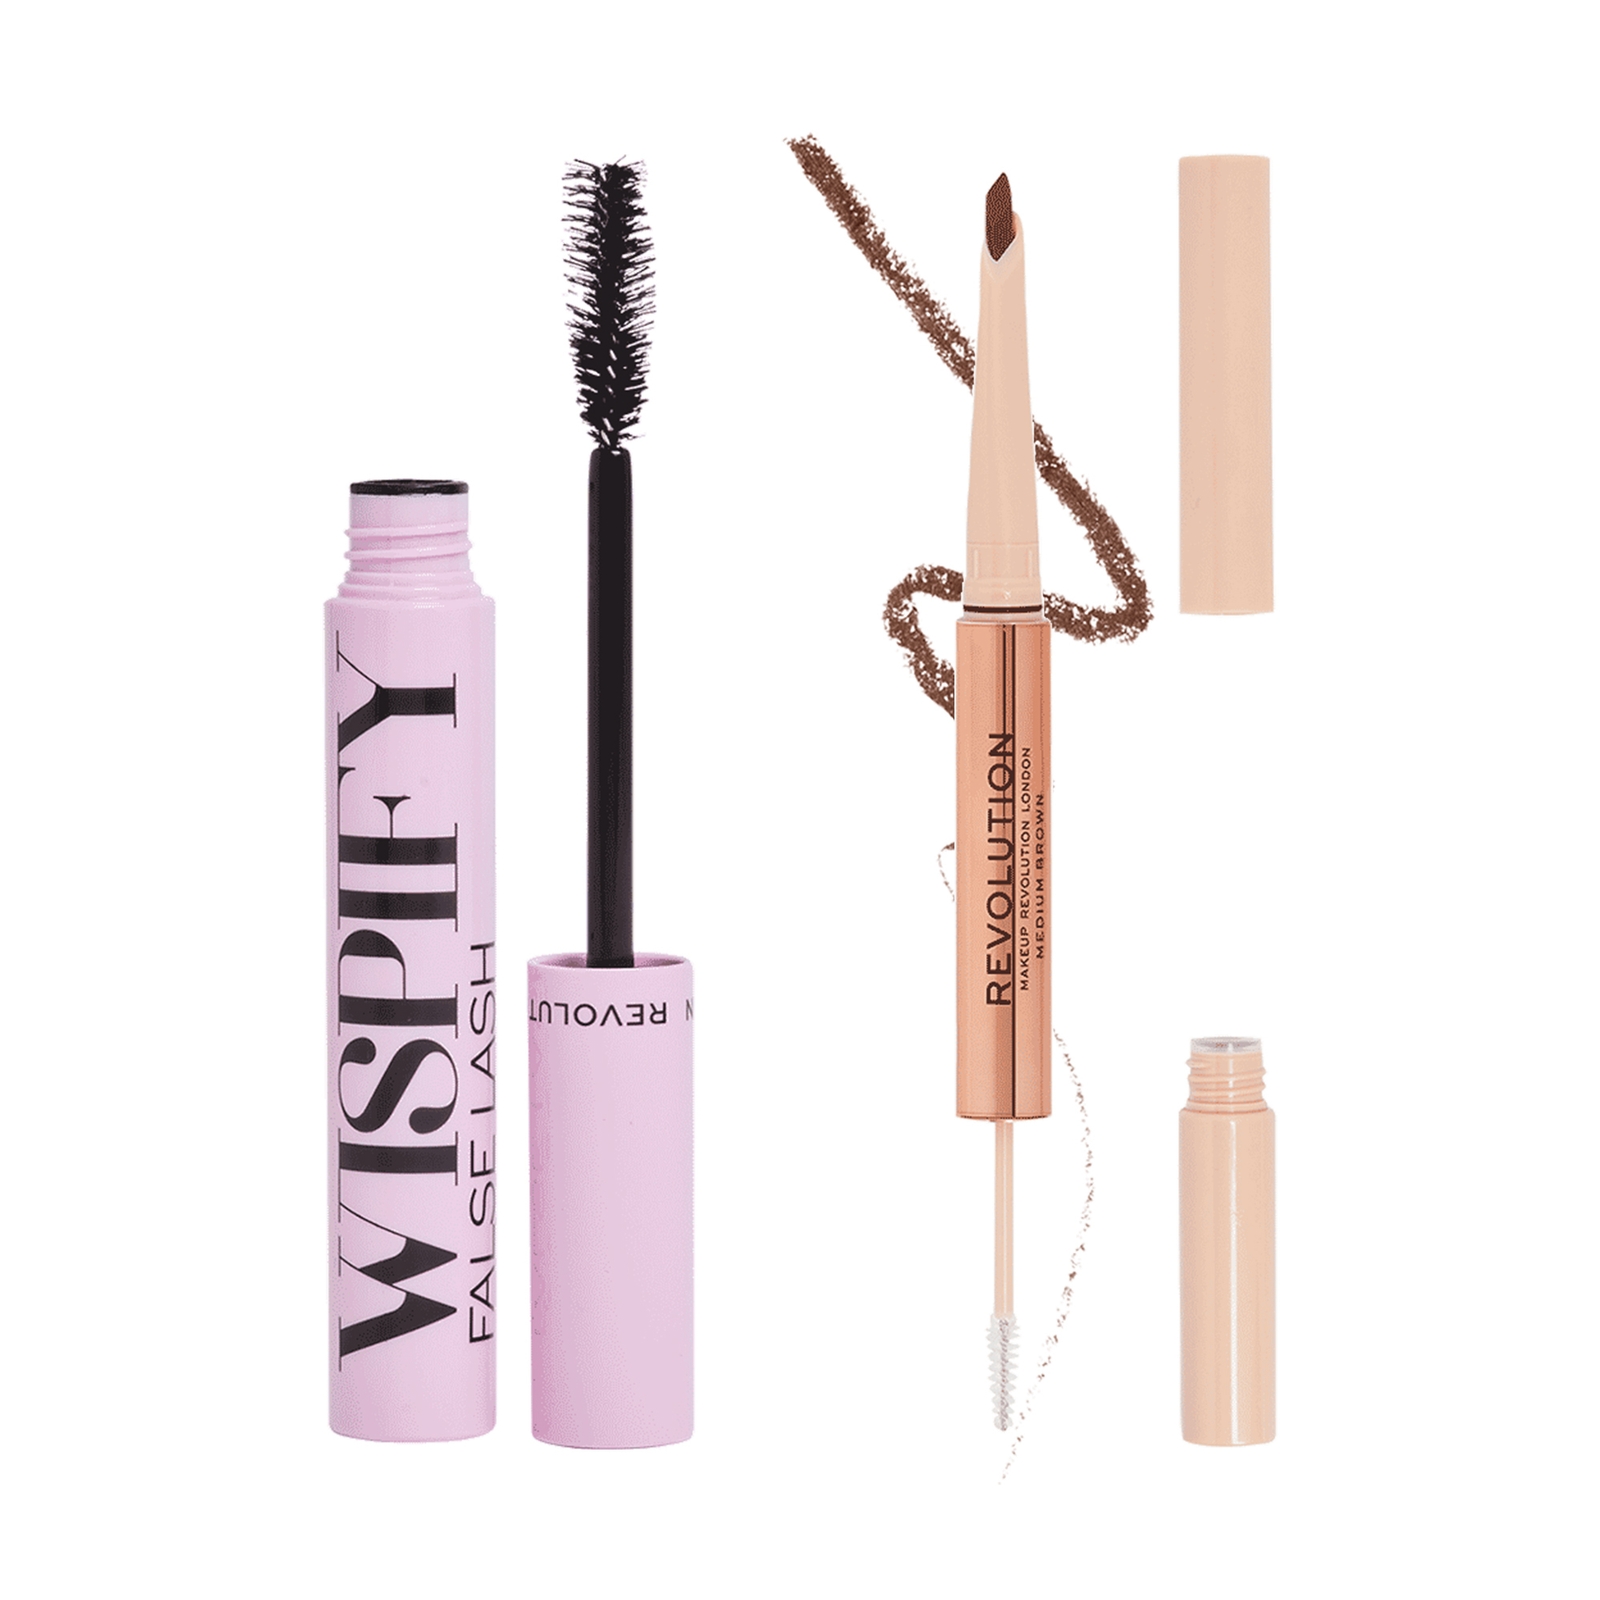 Image of Revolution Wispify and Fluffy Brow Bundle (Various Shades) - Medium Brown